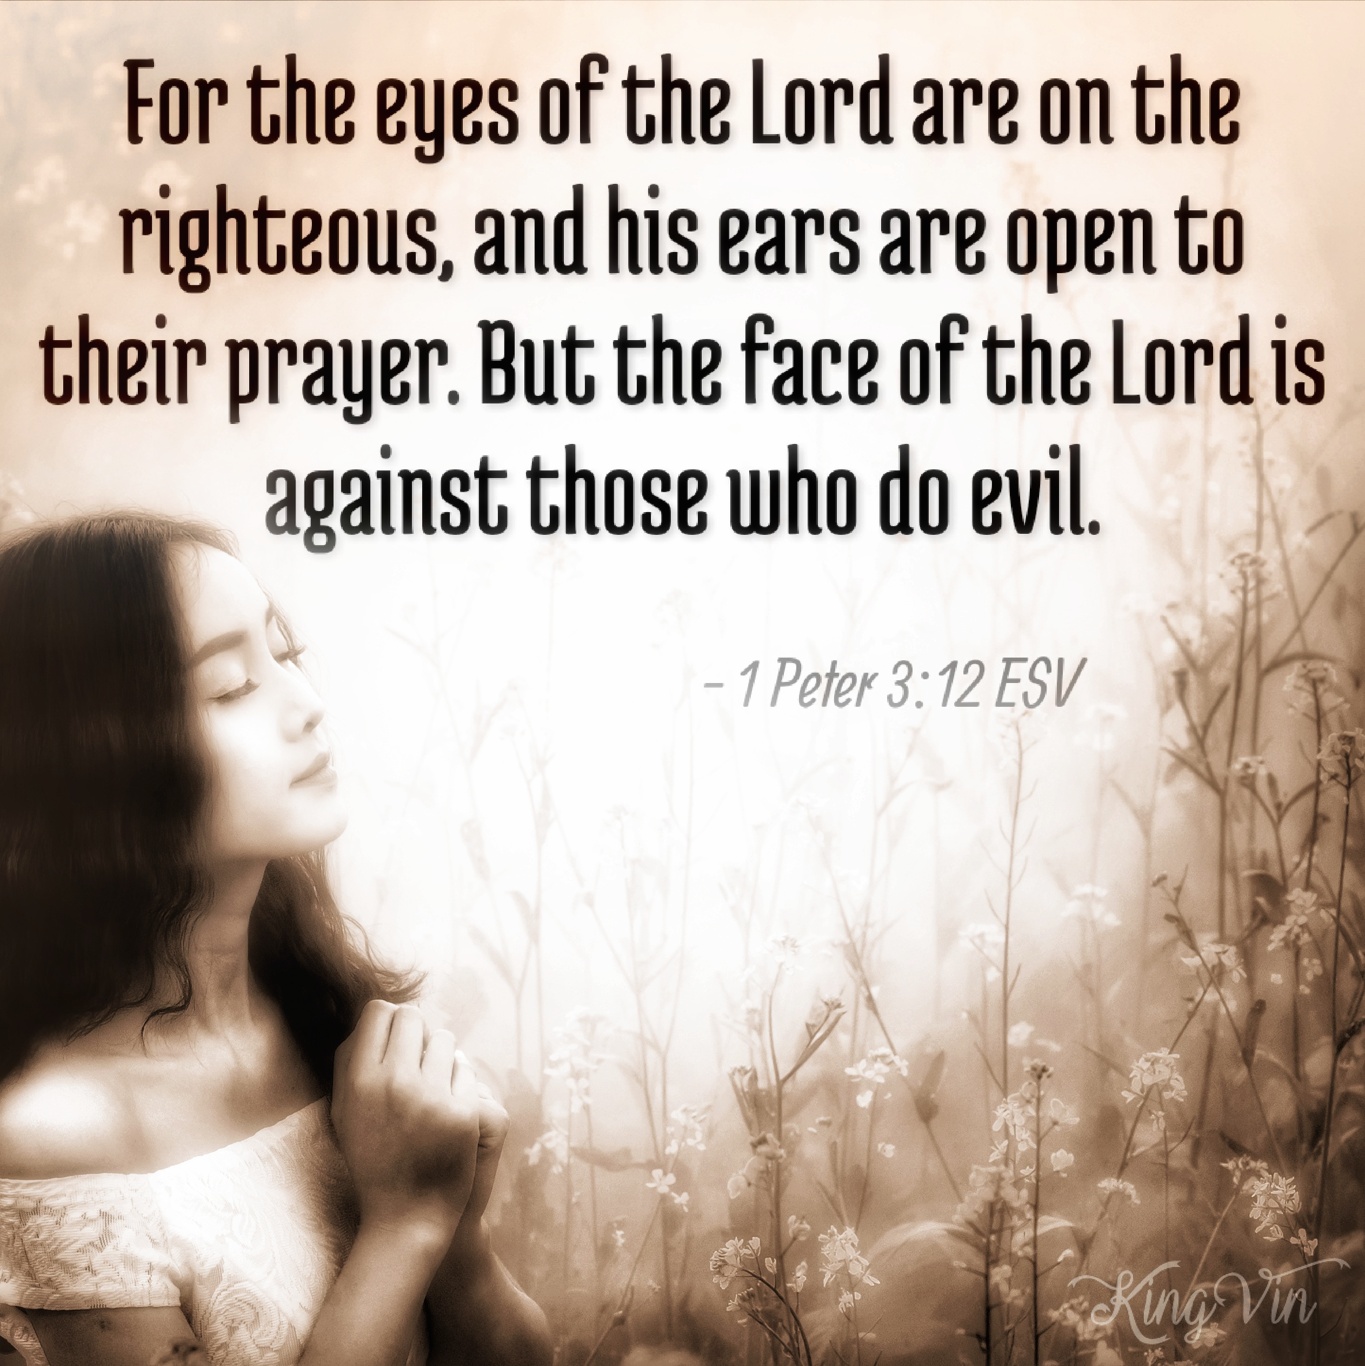 For the eyes of the Lord are on the righteous, and his ears are open to their prayer. But the face of the Lord is against those who do evil." 1 Peter 3:12 ESV